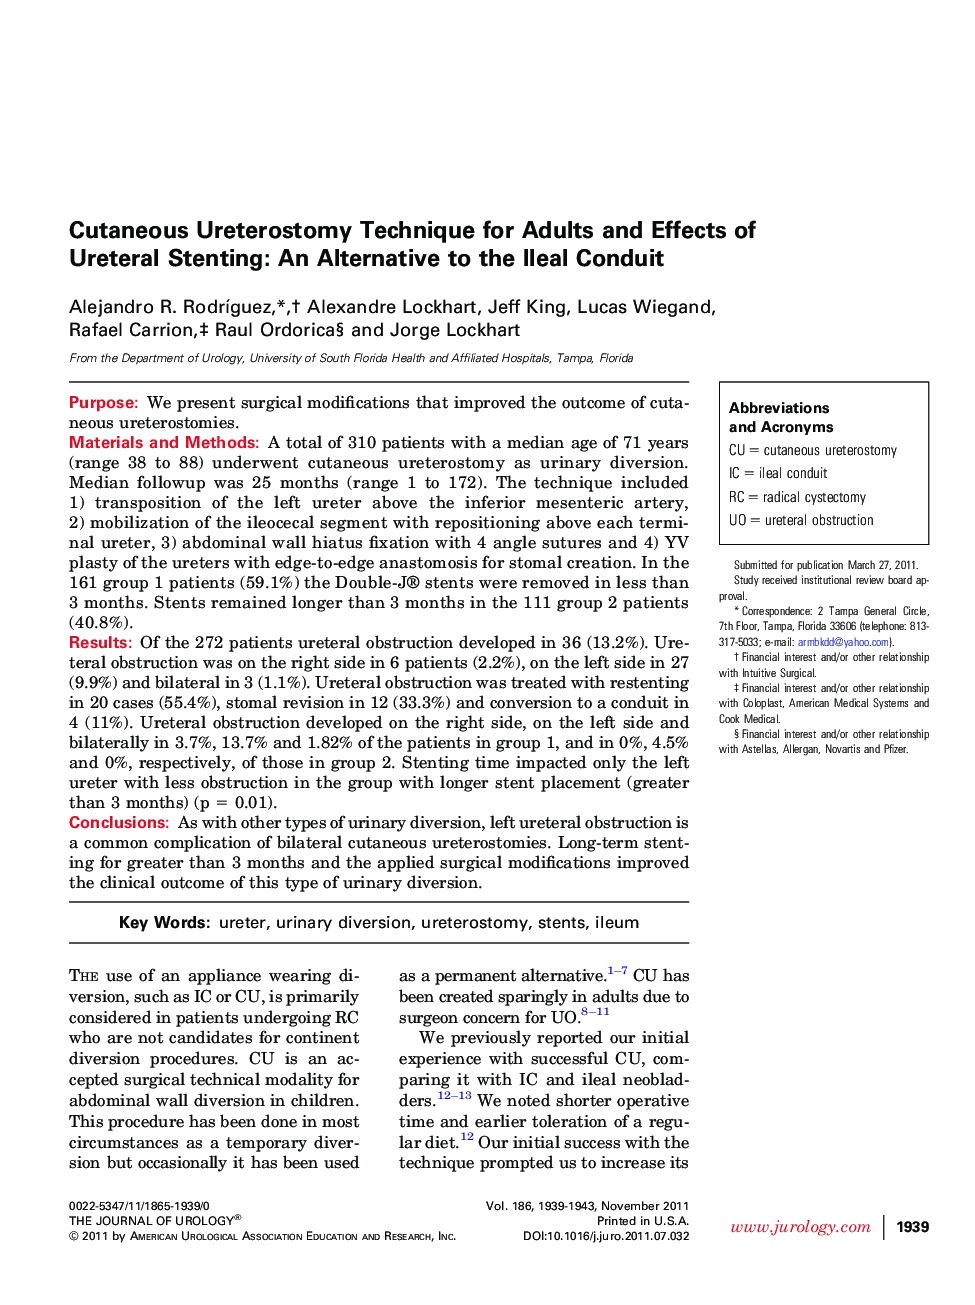 Cutaneous Ureterostomy Technique for Adults and Effects of Ureteral Stenting: An Alternative to the Ileal Conduit 